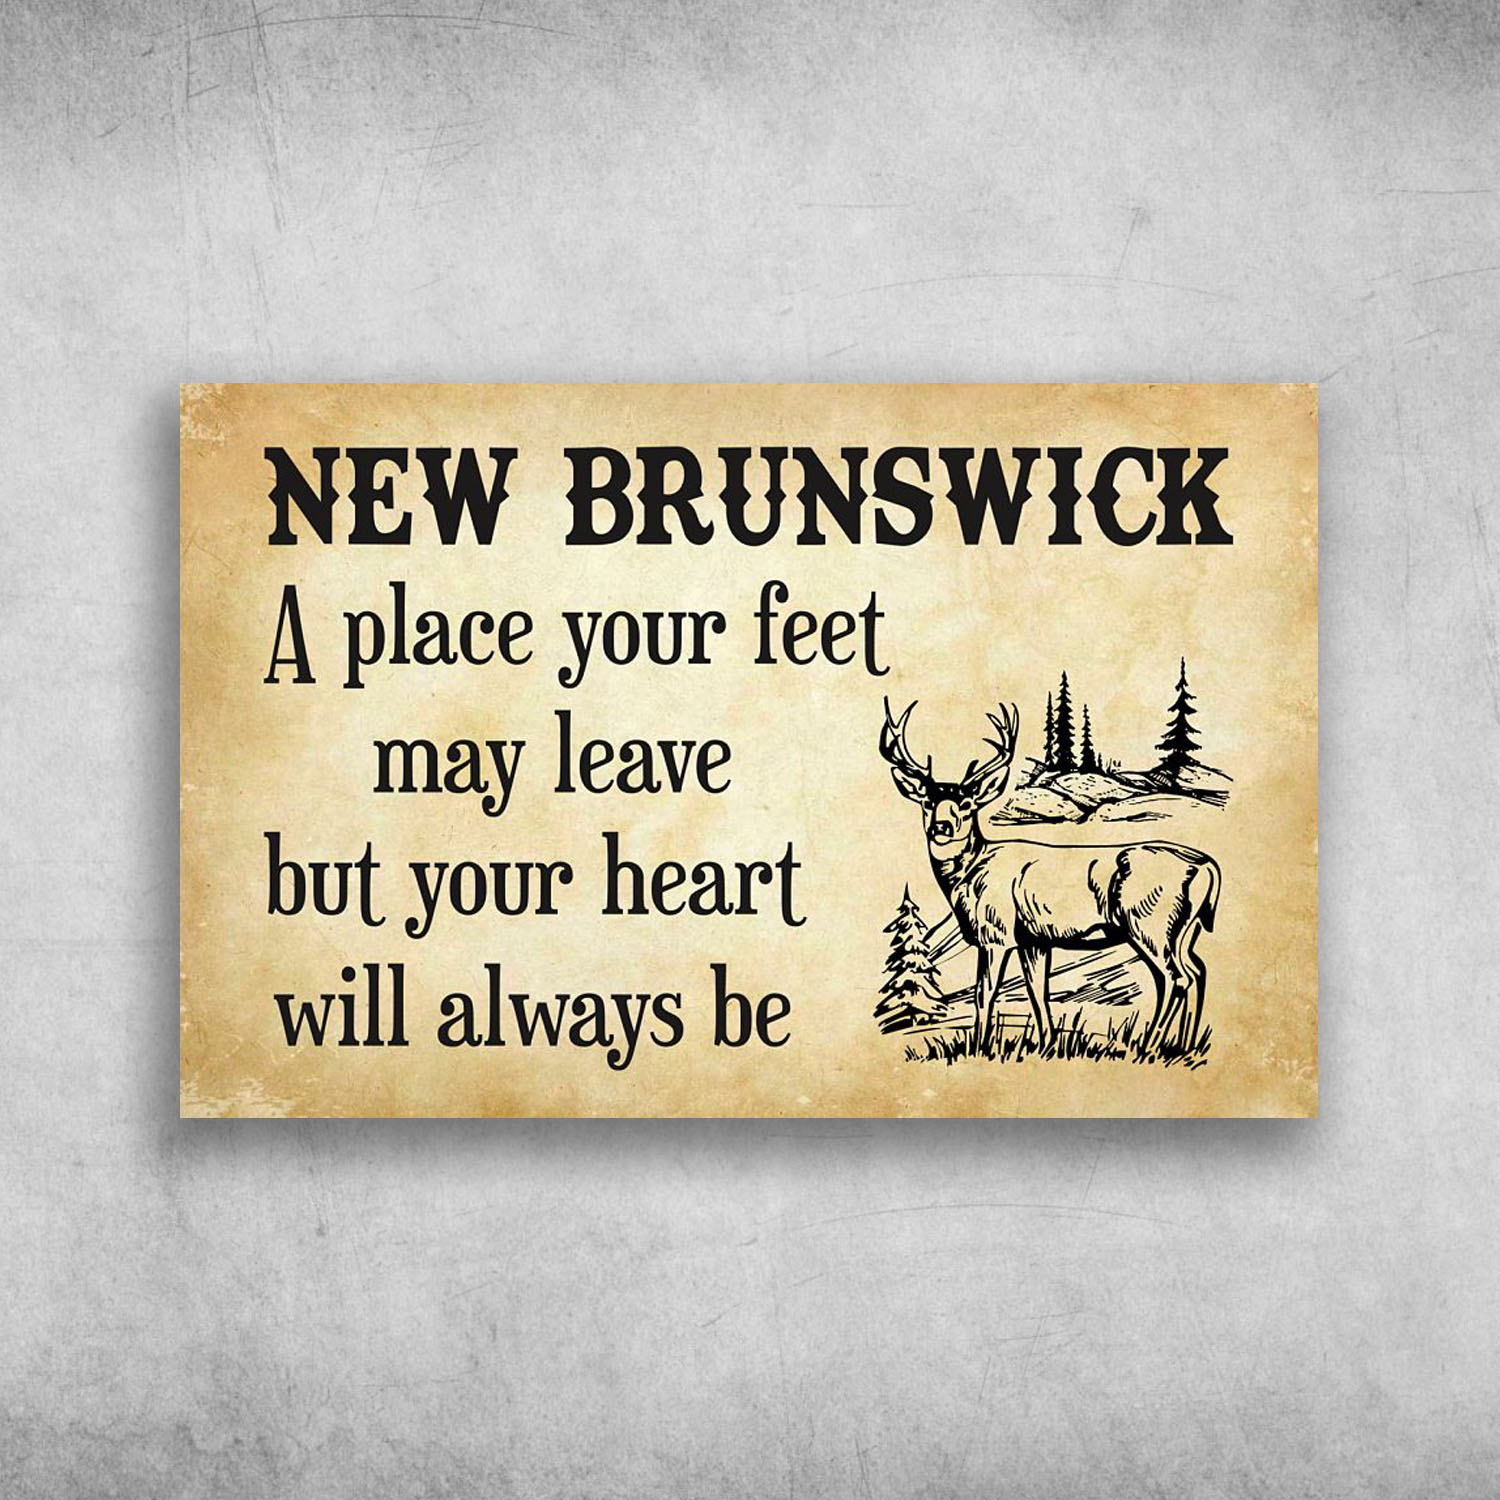 New Brunswick A Place Your Feet May Leave